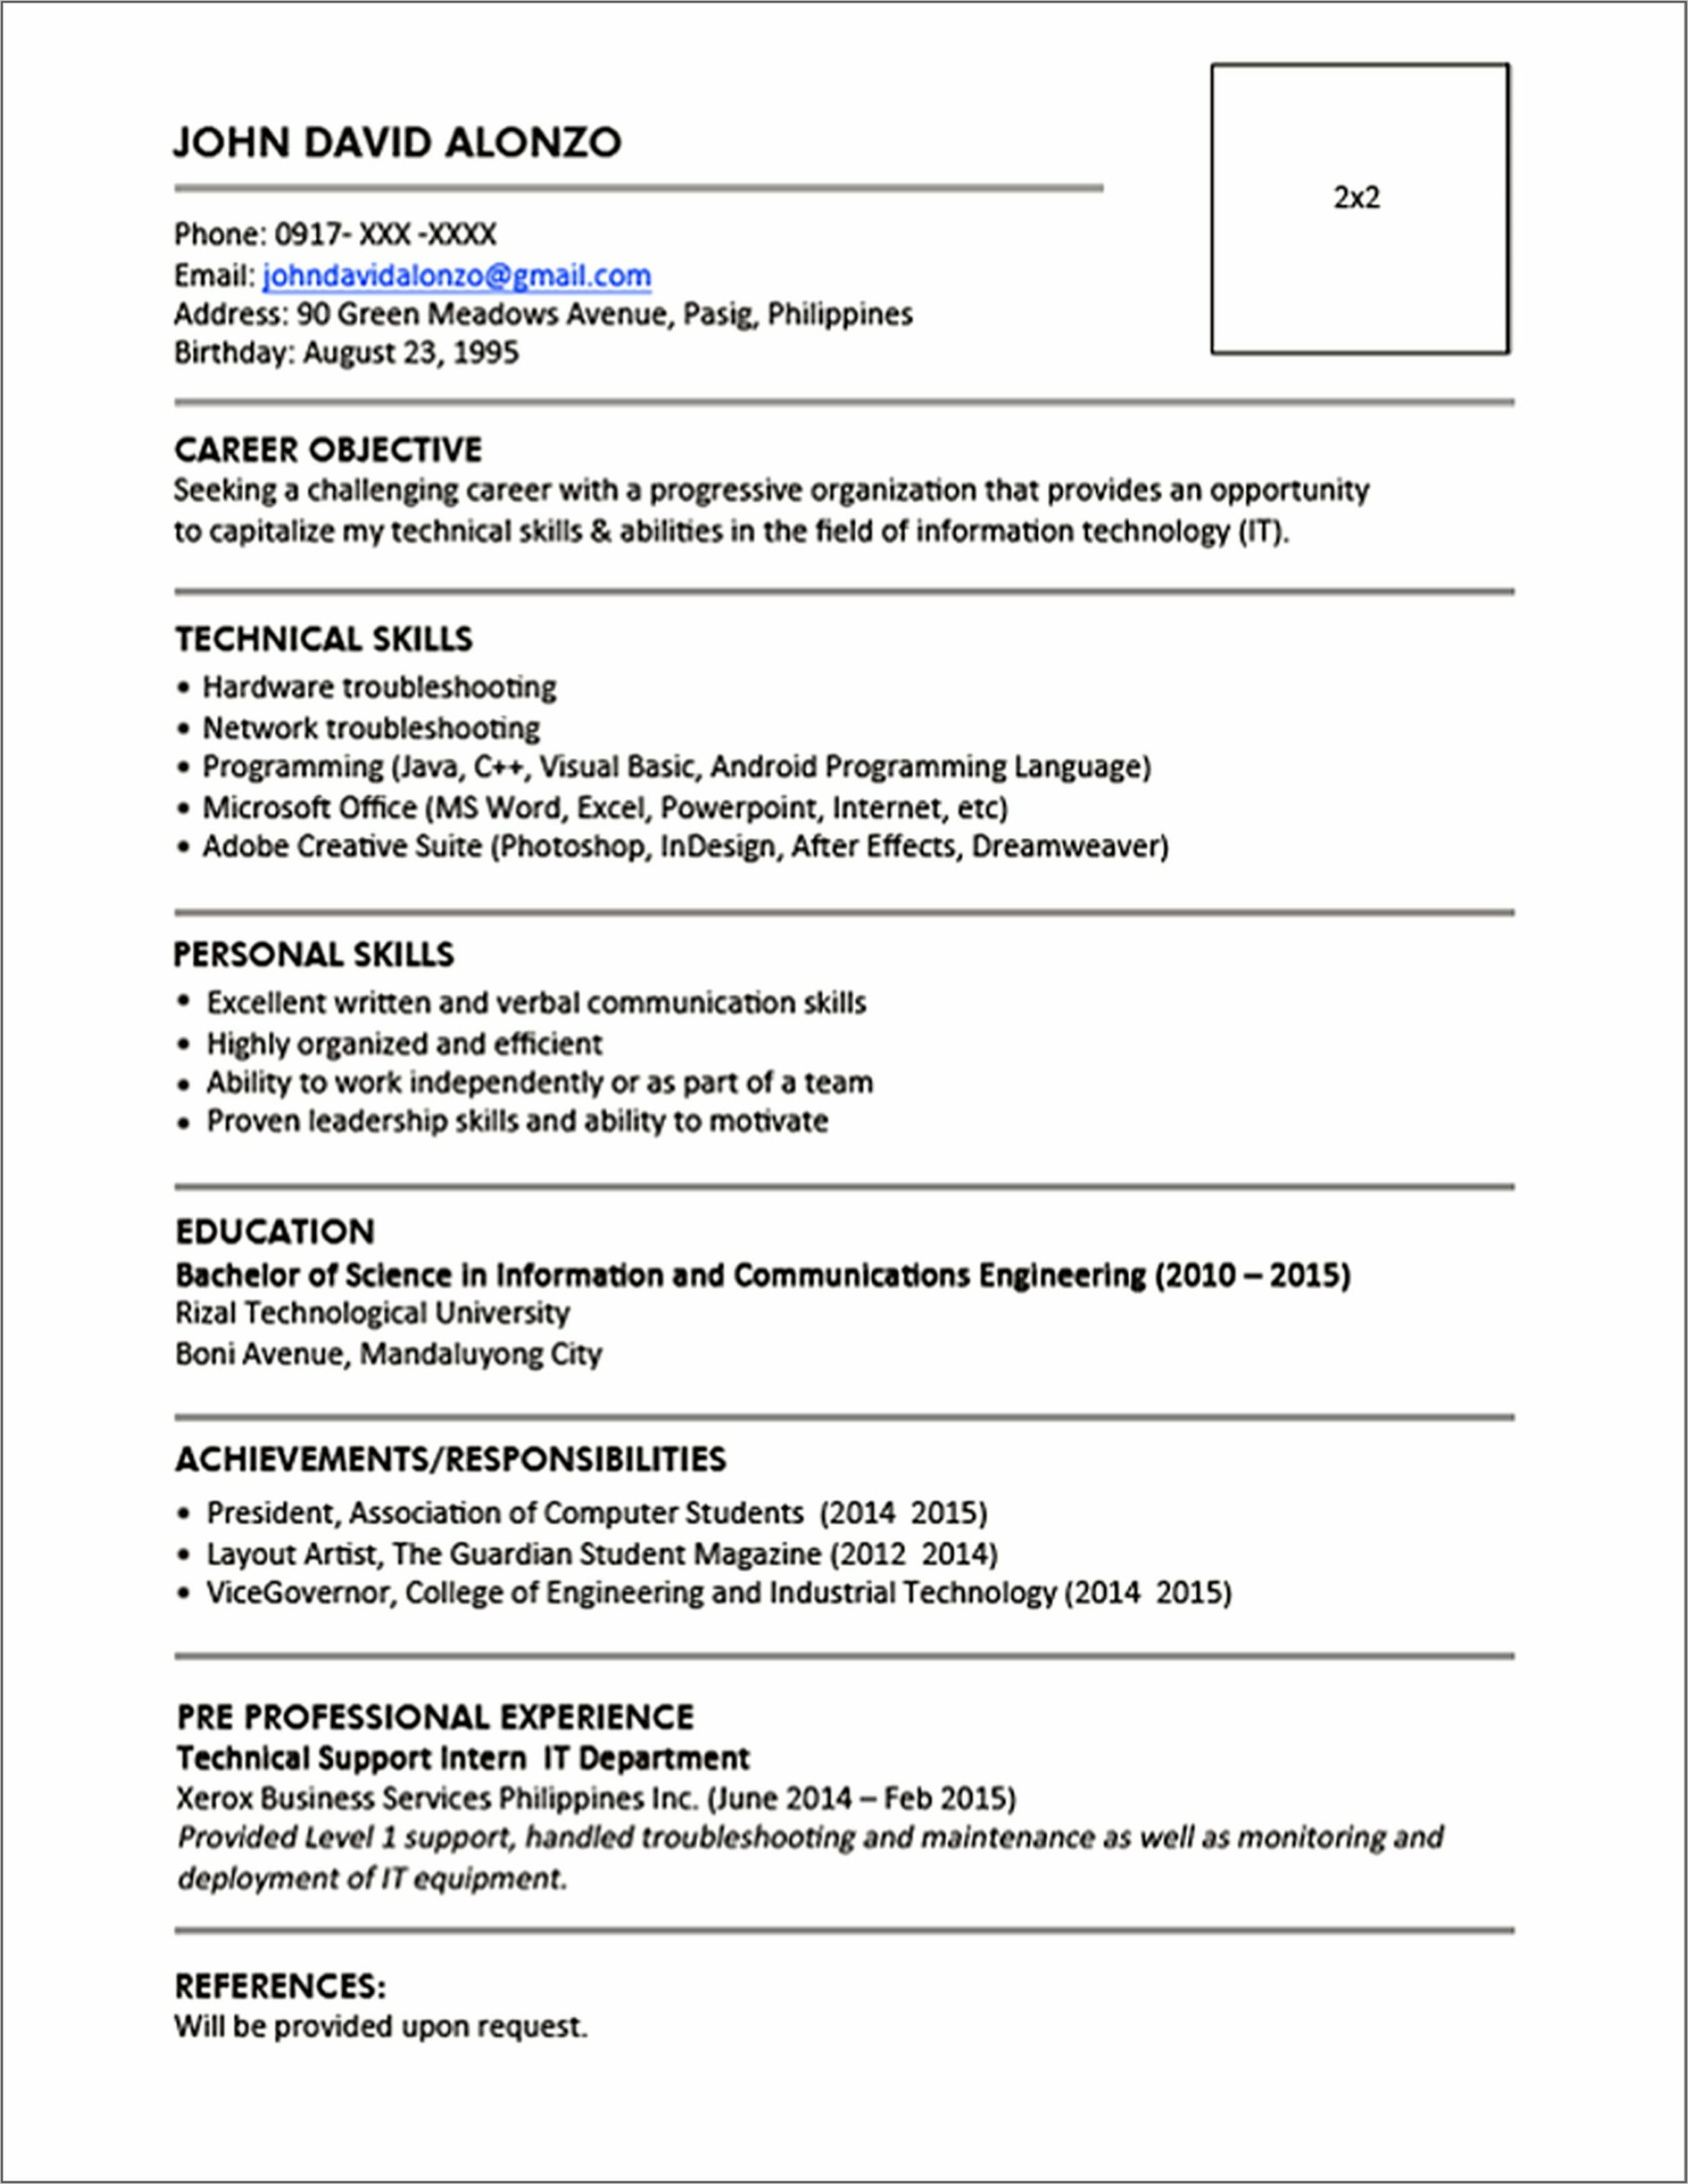 Example Resume Summary For A Student